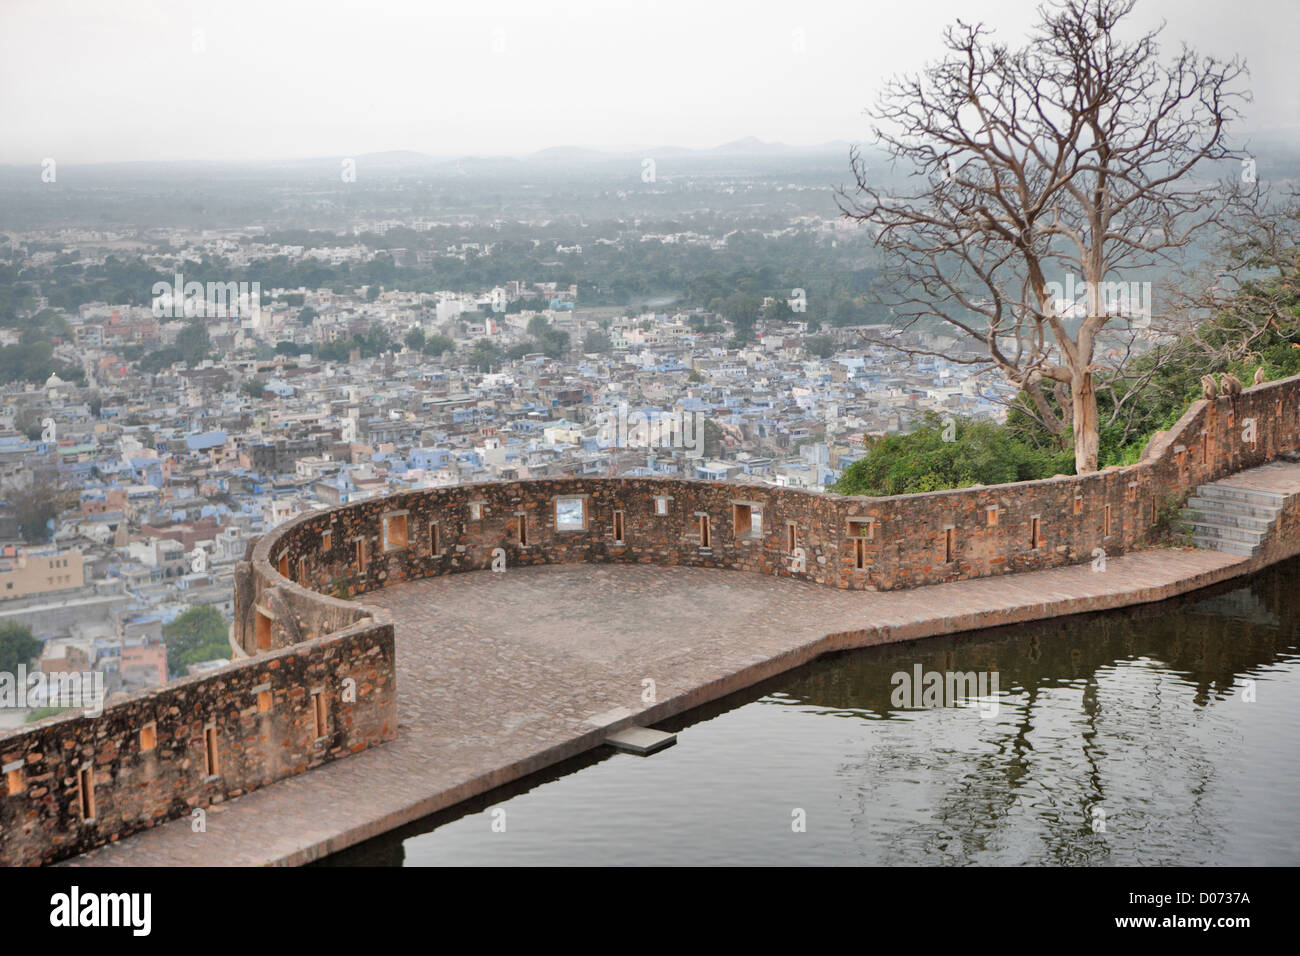 An over view of Chittorgarh town from Chittorgarh Fort, Rajasthan, India Stock Photo